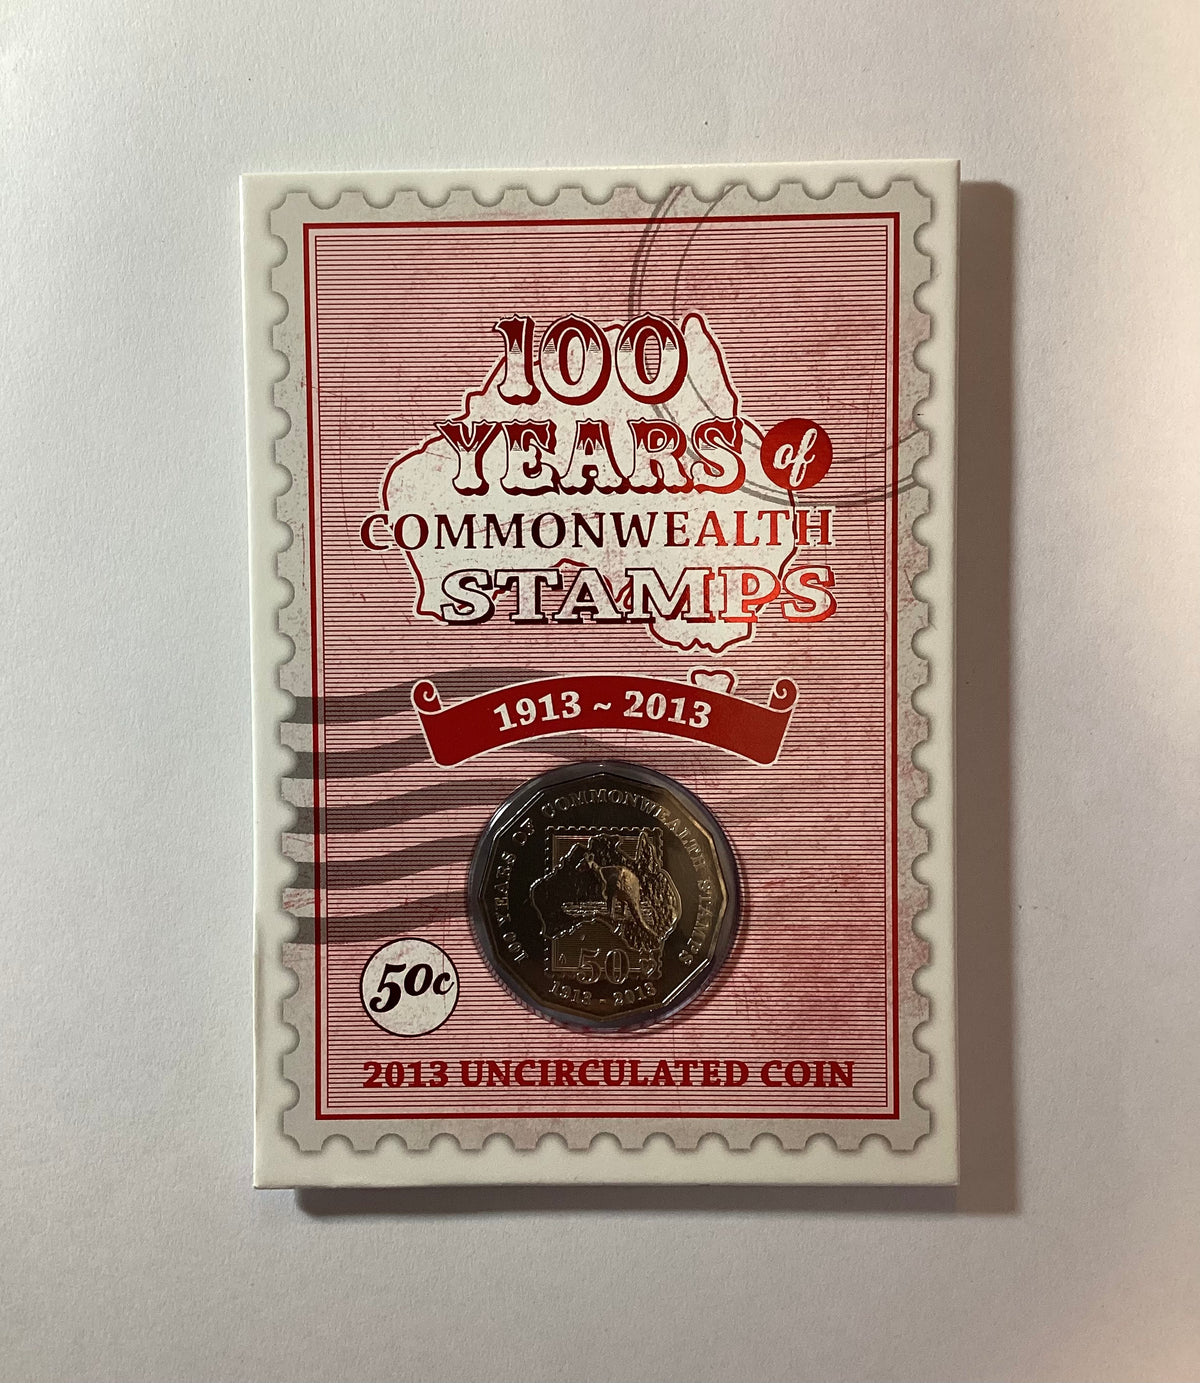 2013 50c 100 Years of Commonwealth Stamps Carded Coin